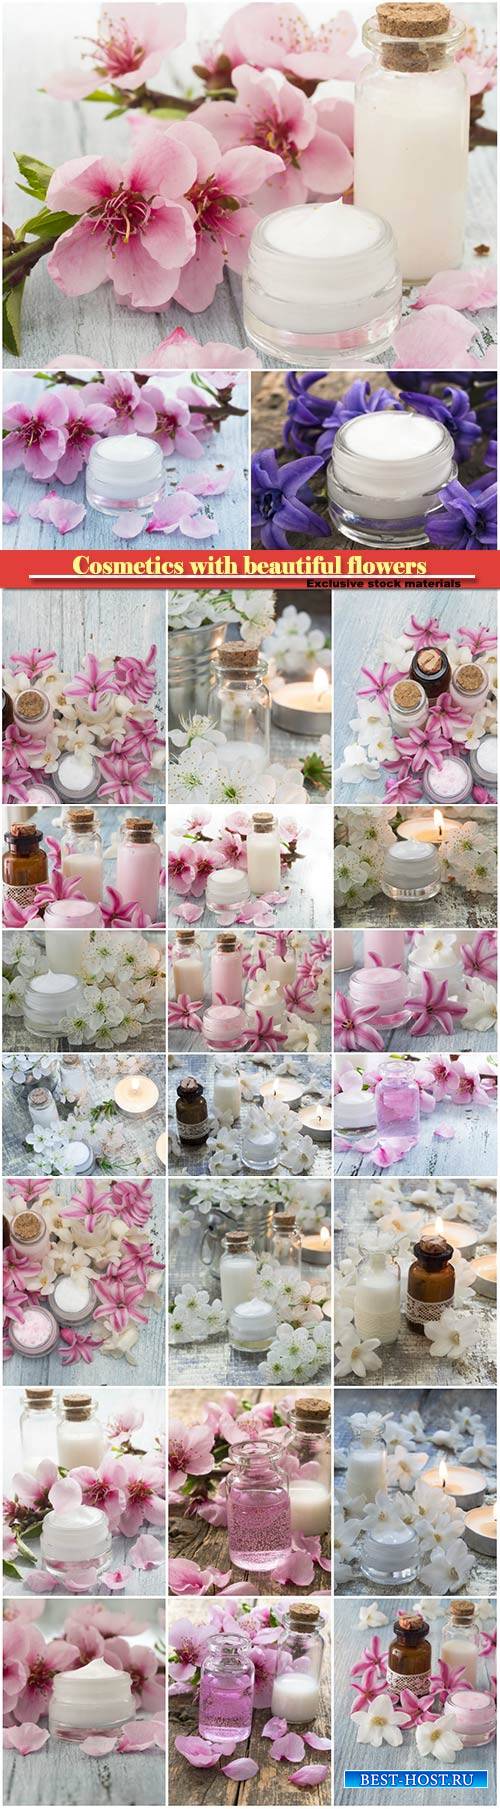 Cosmetics with beautiful flowers on a wooden background